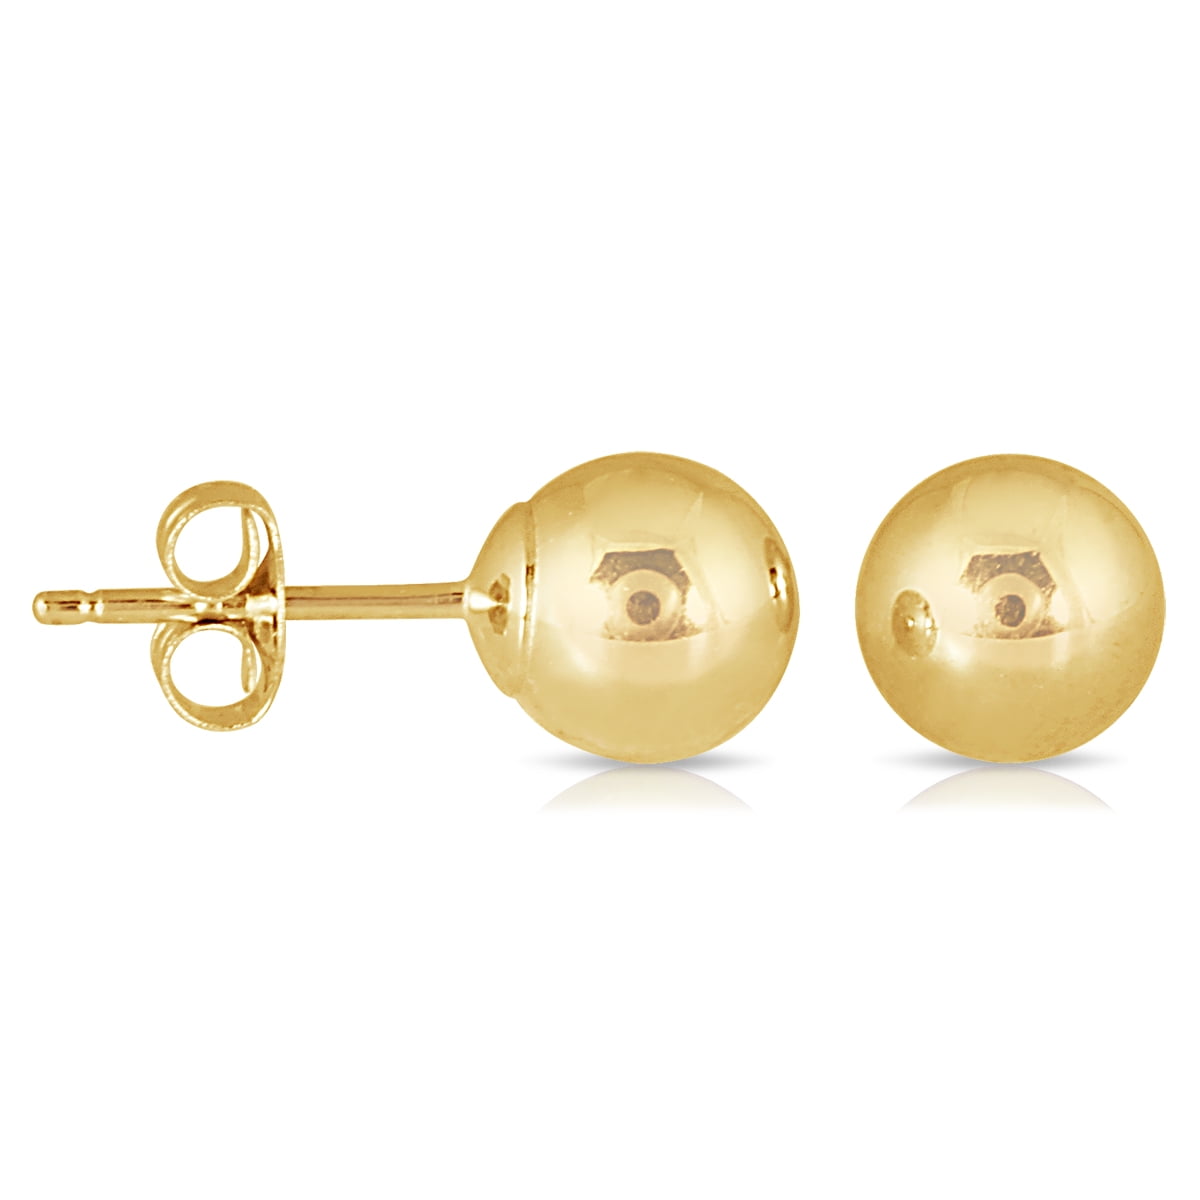 8mm **PAIR* Stamped Authentic Ball 10K Yellow Gold GOLD Stud Earrings 10KT